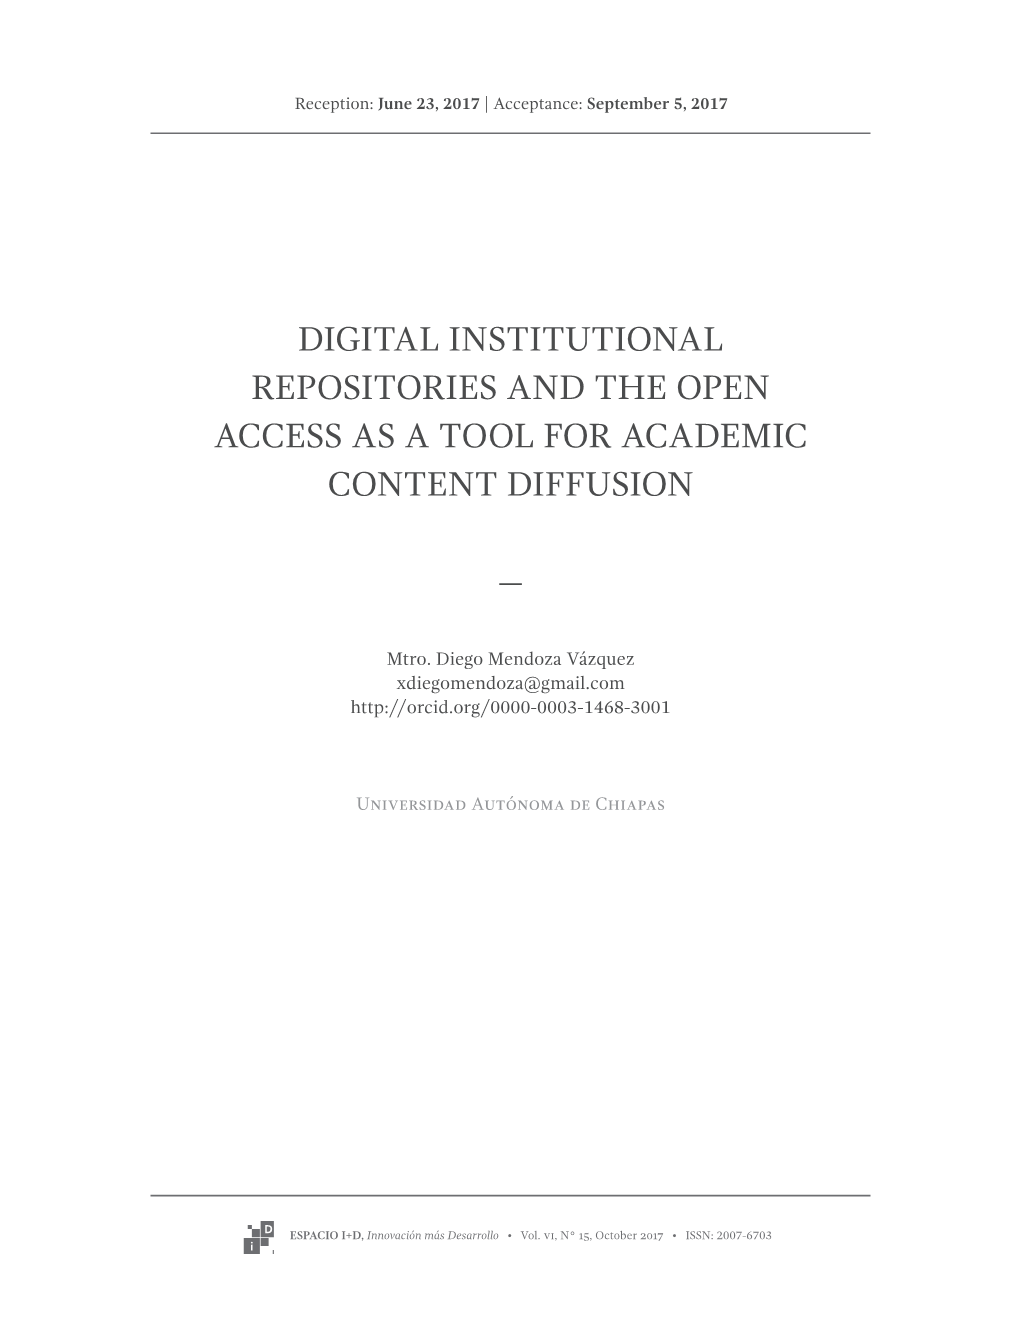 Digital Institutional Repositories and the Open Access As a Tool for Academic Content Diffusion